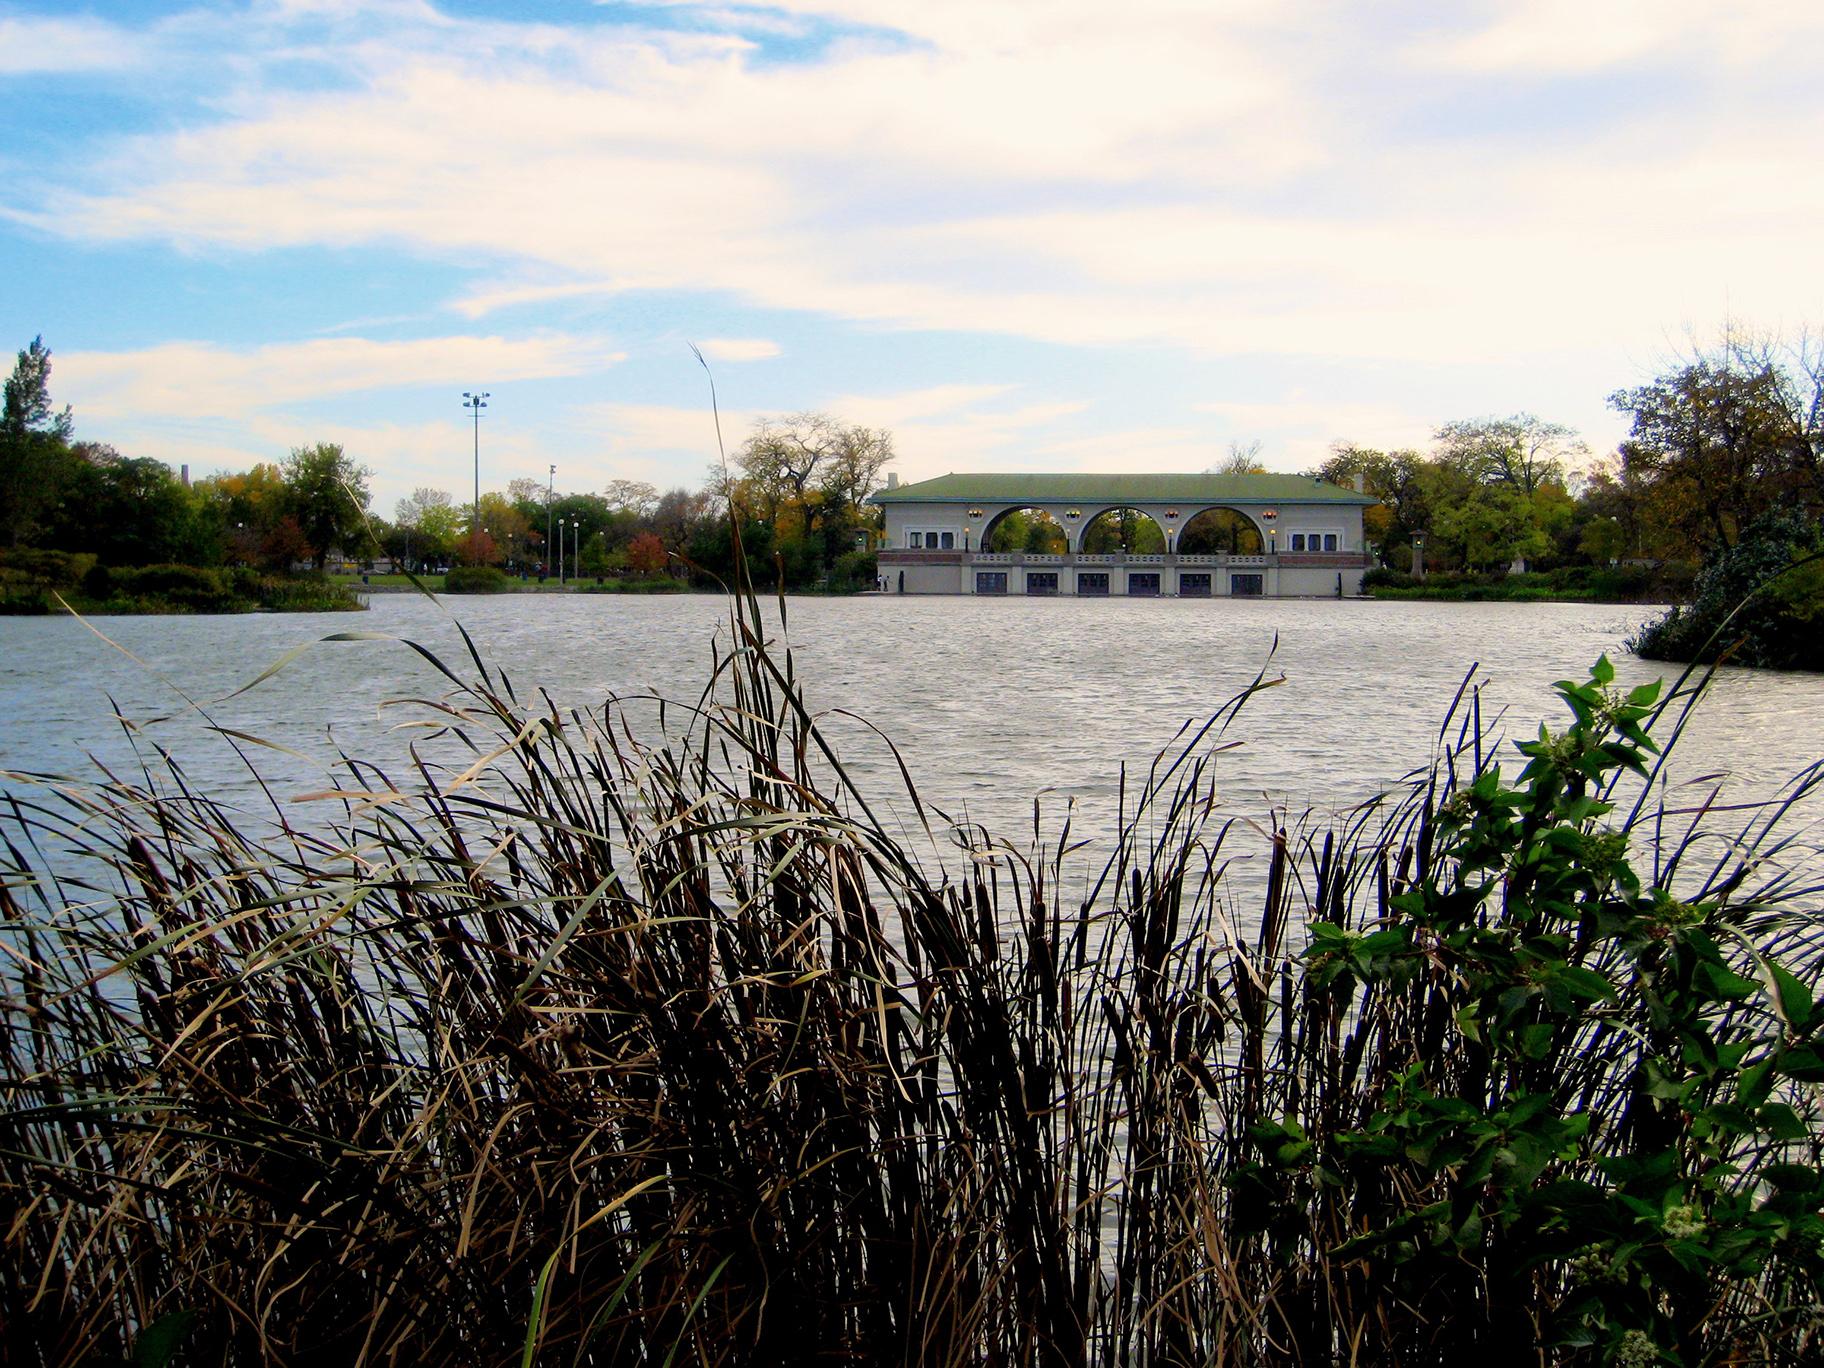 The lagoon and boathouse at Humboldt Park (Peter Fitzgerald / Wikimedia Commons)